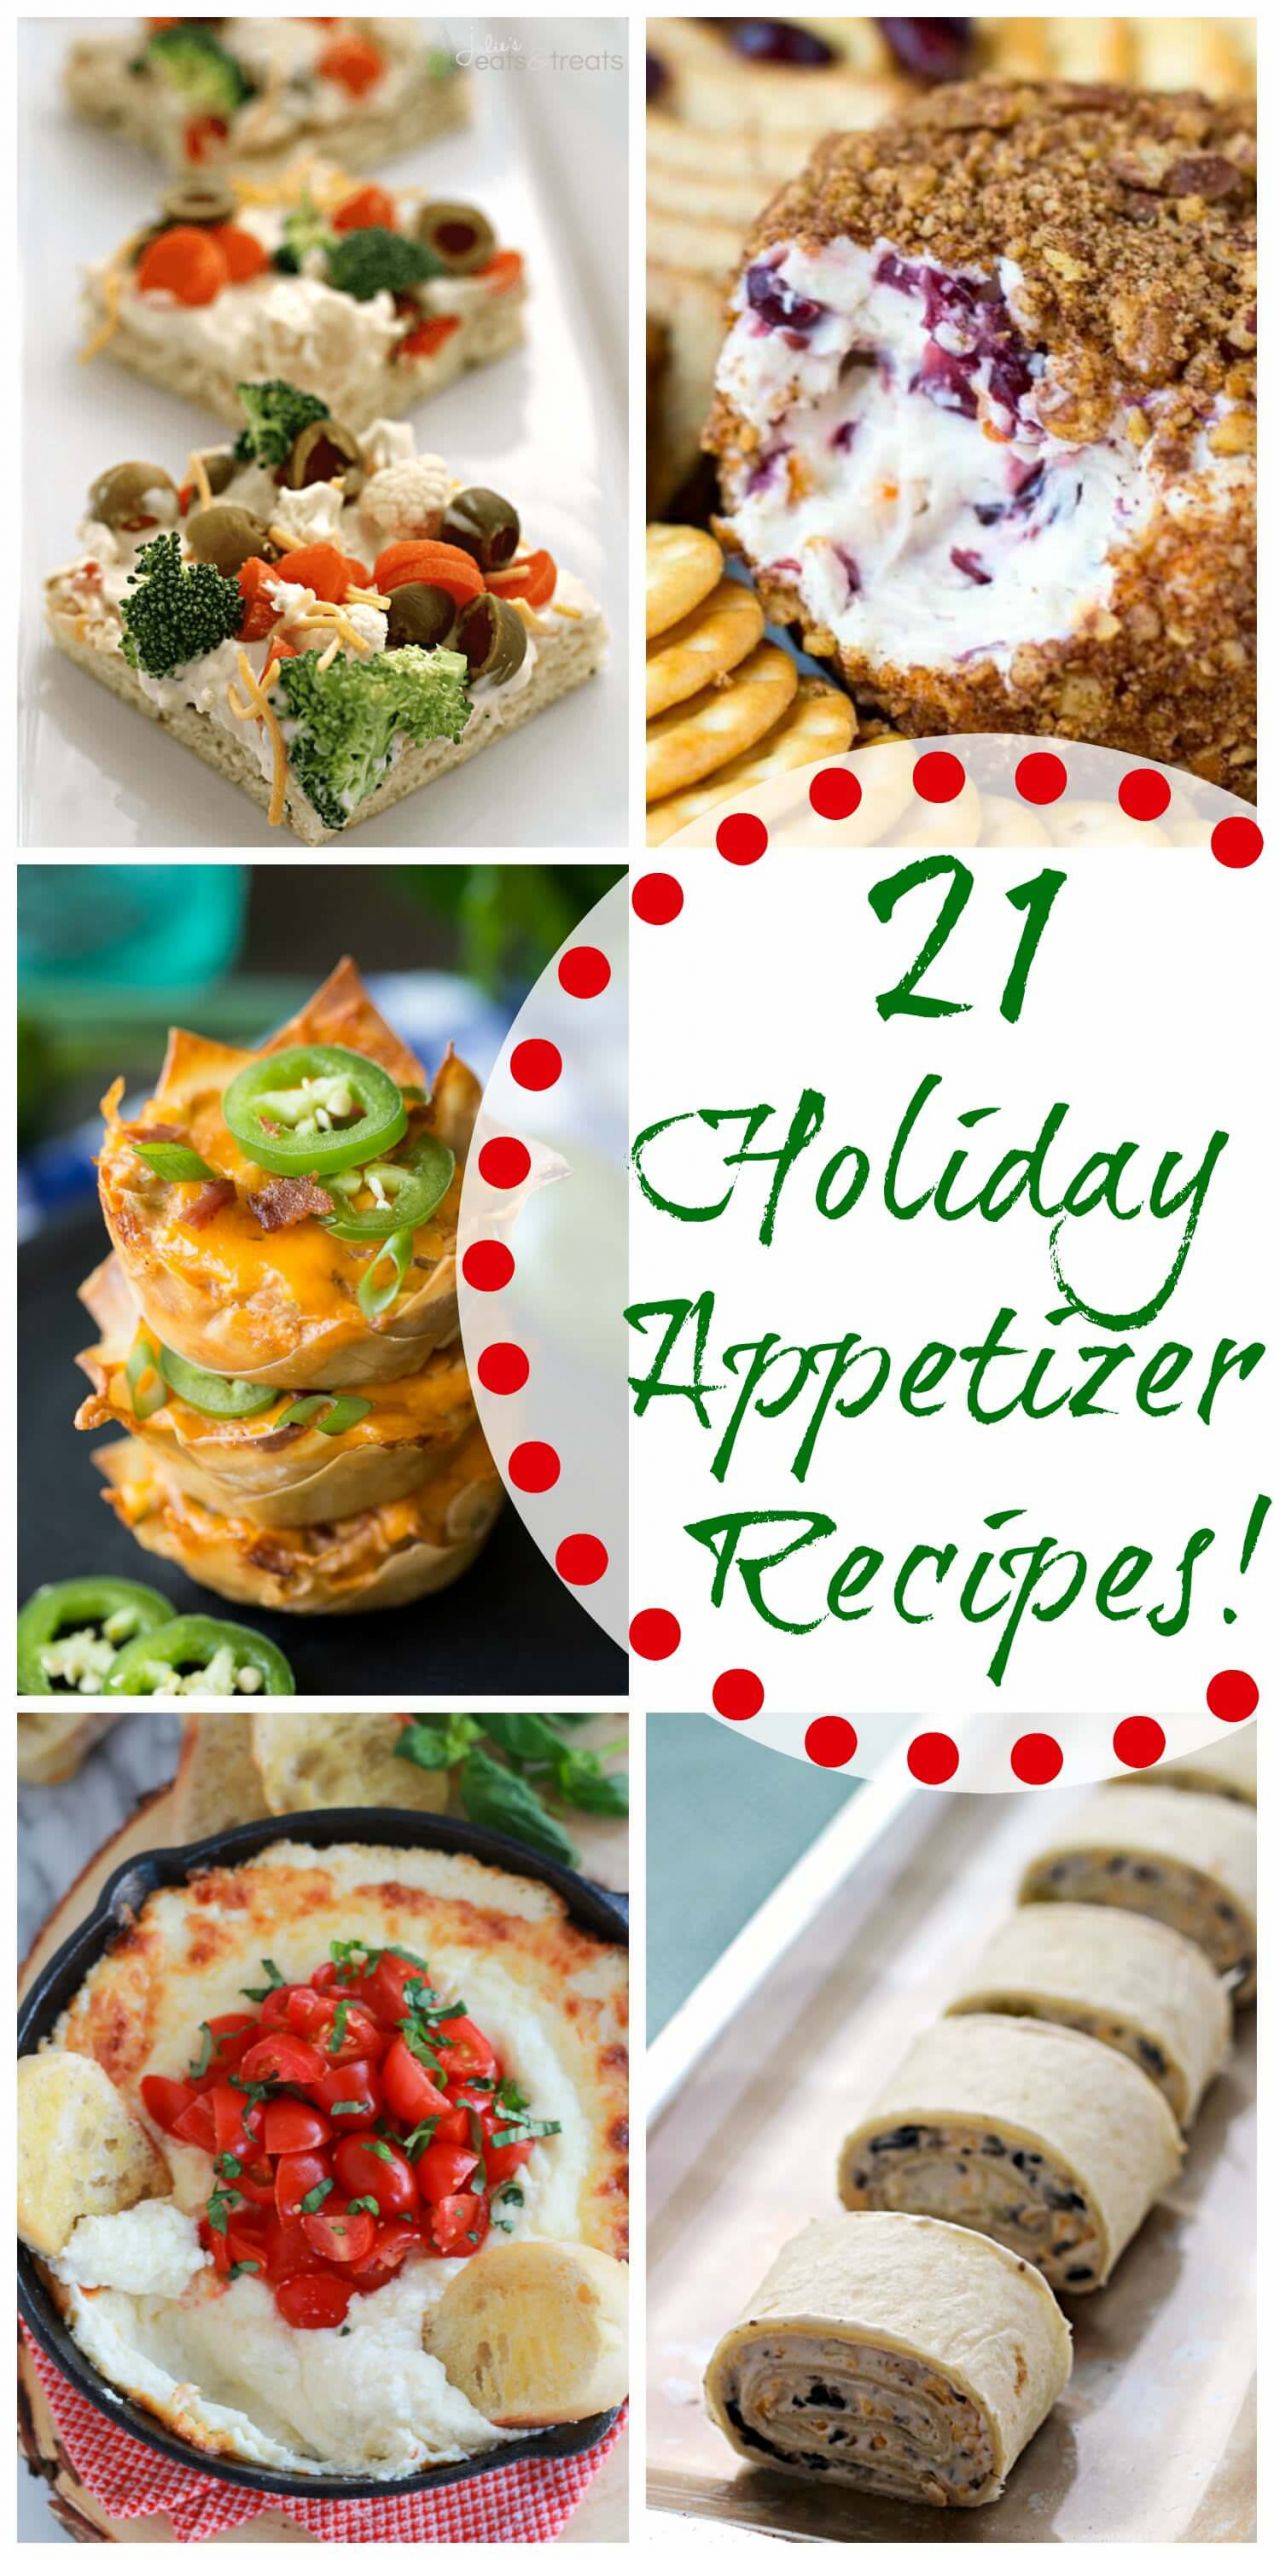 Christmas Holiday Party Appetizers Ideas
 21 Holiday Appetizer Recipes Giveaway Julie s Eats